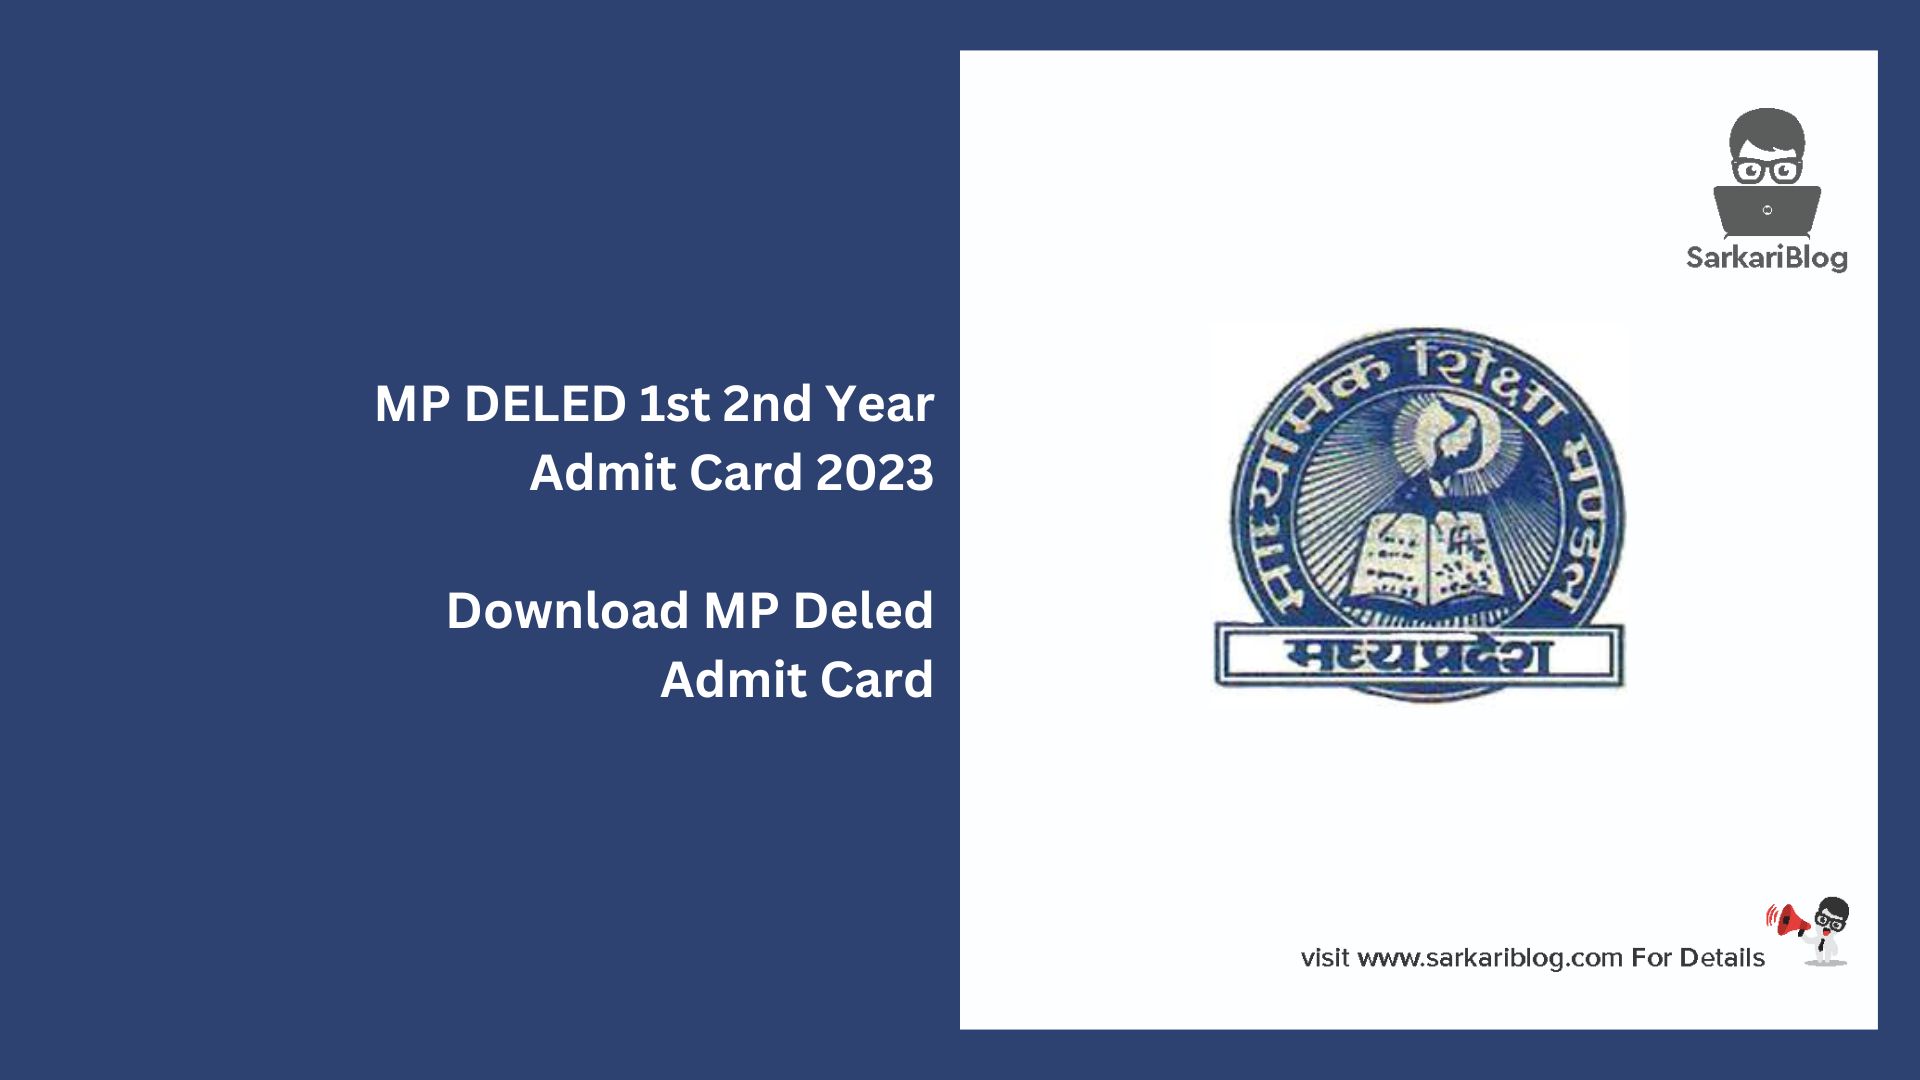 MP DELED 1st 2nd Year Admit Card 2023